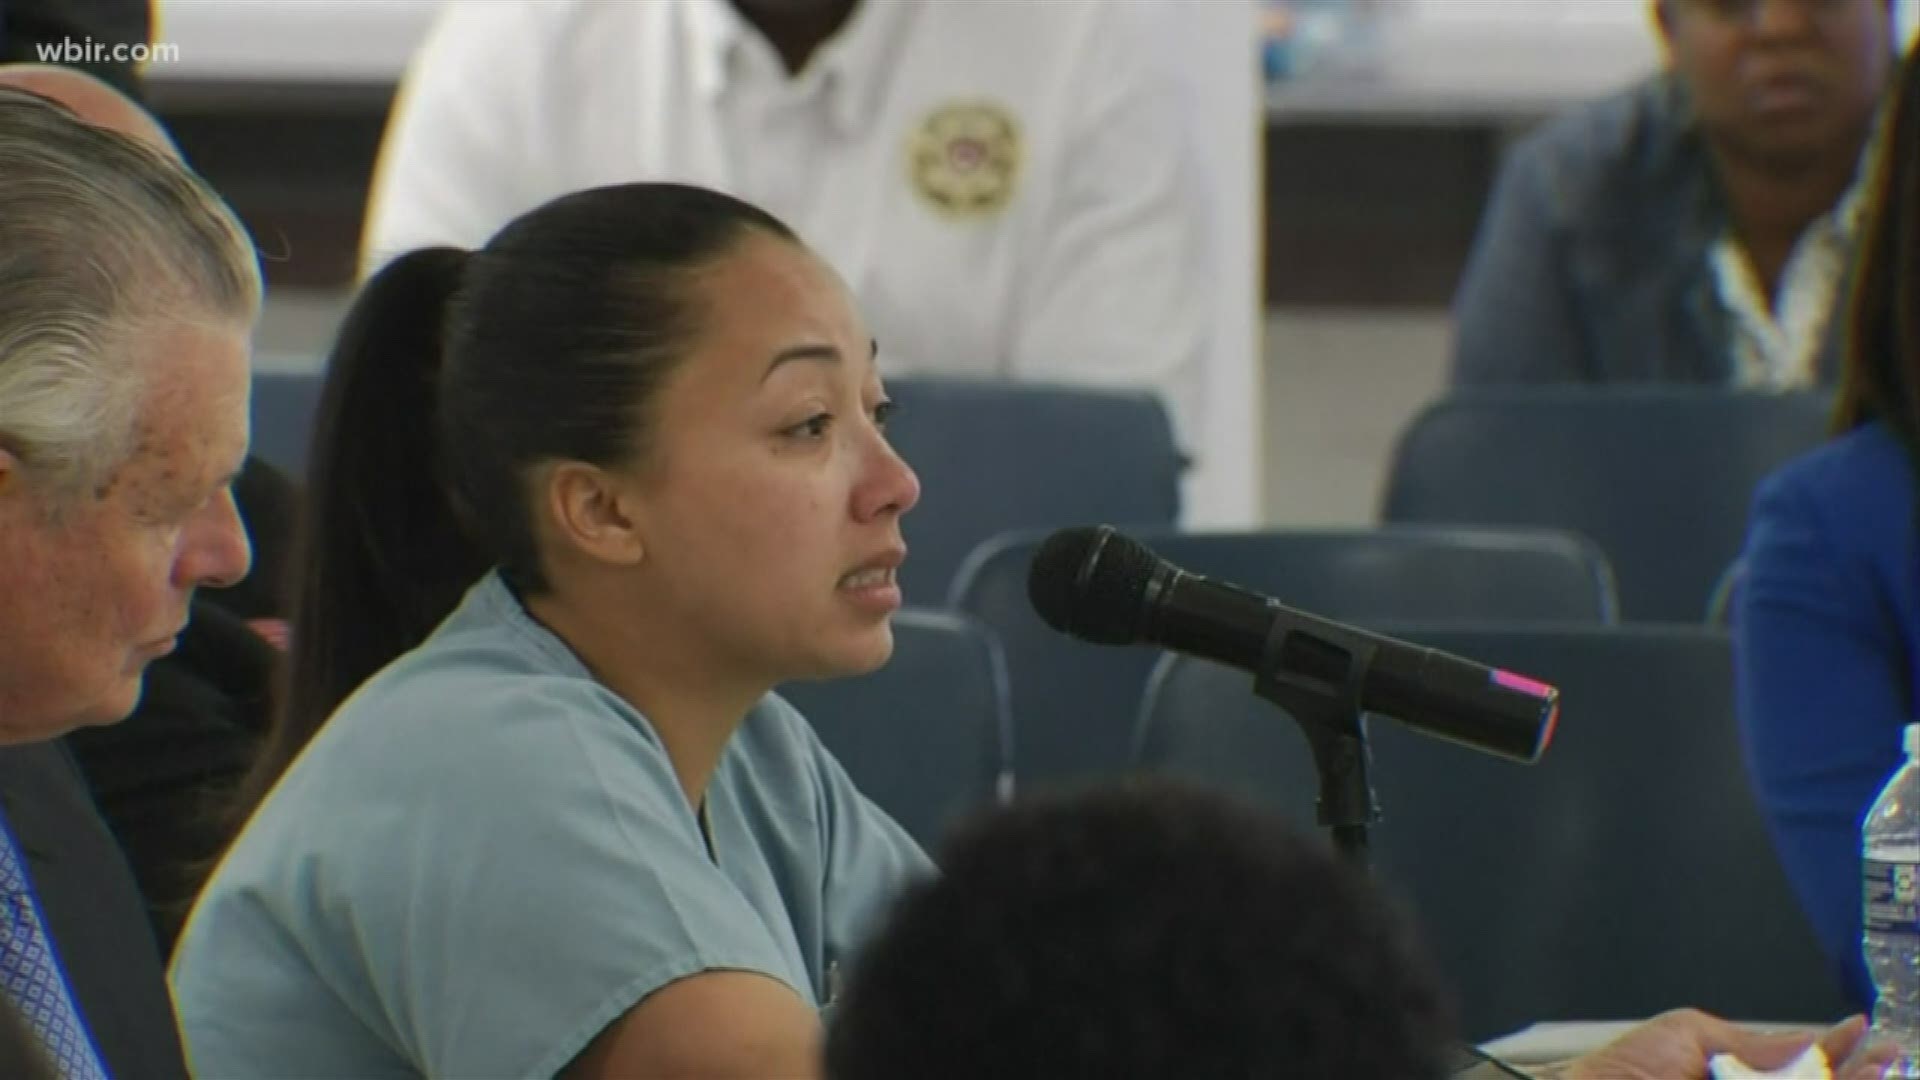 Inmate Cyntoia Brown walked out of prison early Wednesday morning after being granted clemency by former governor Bill Haslam.